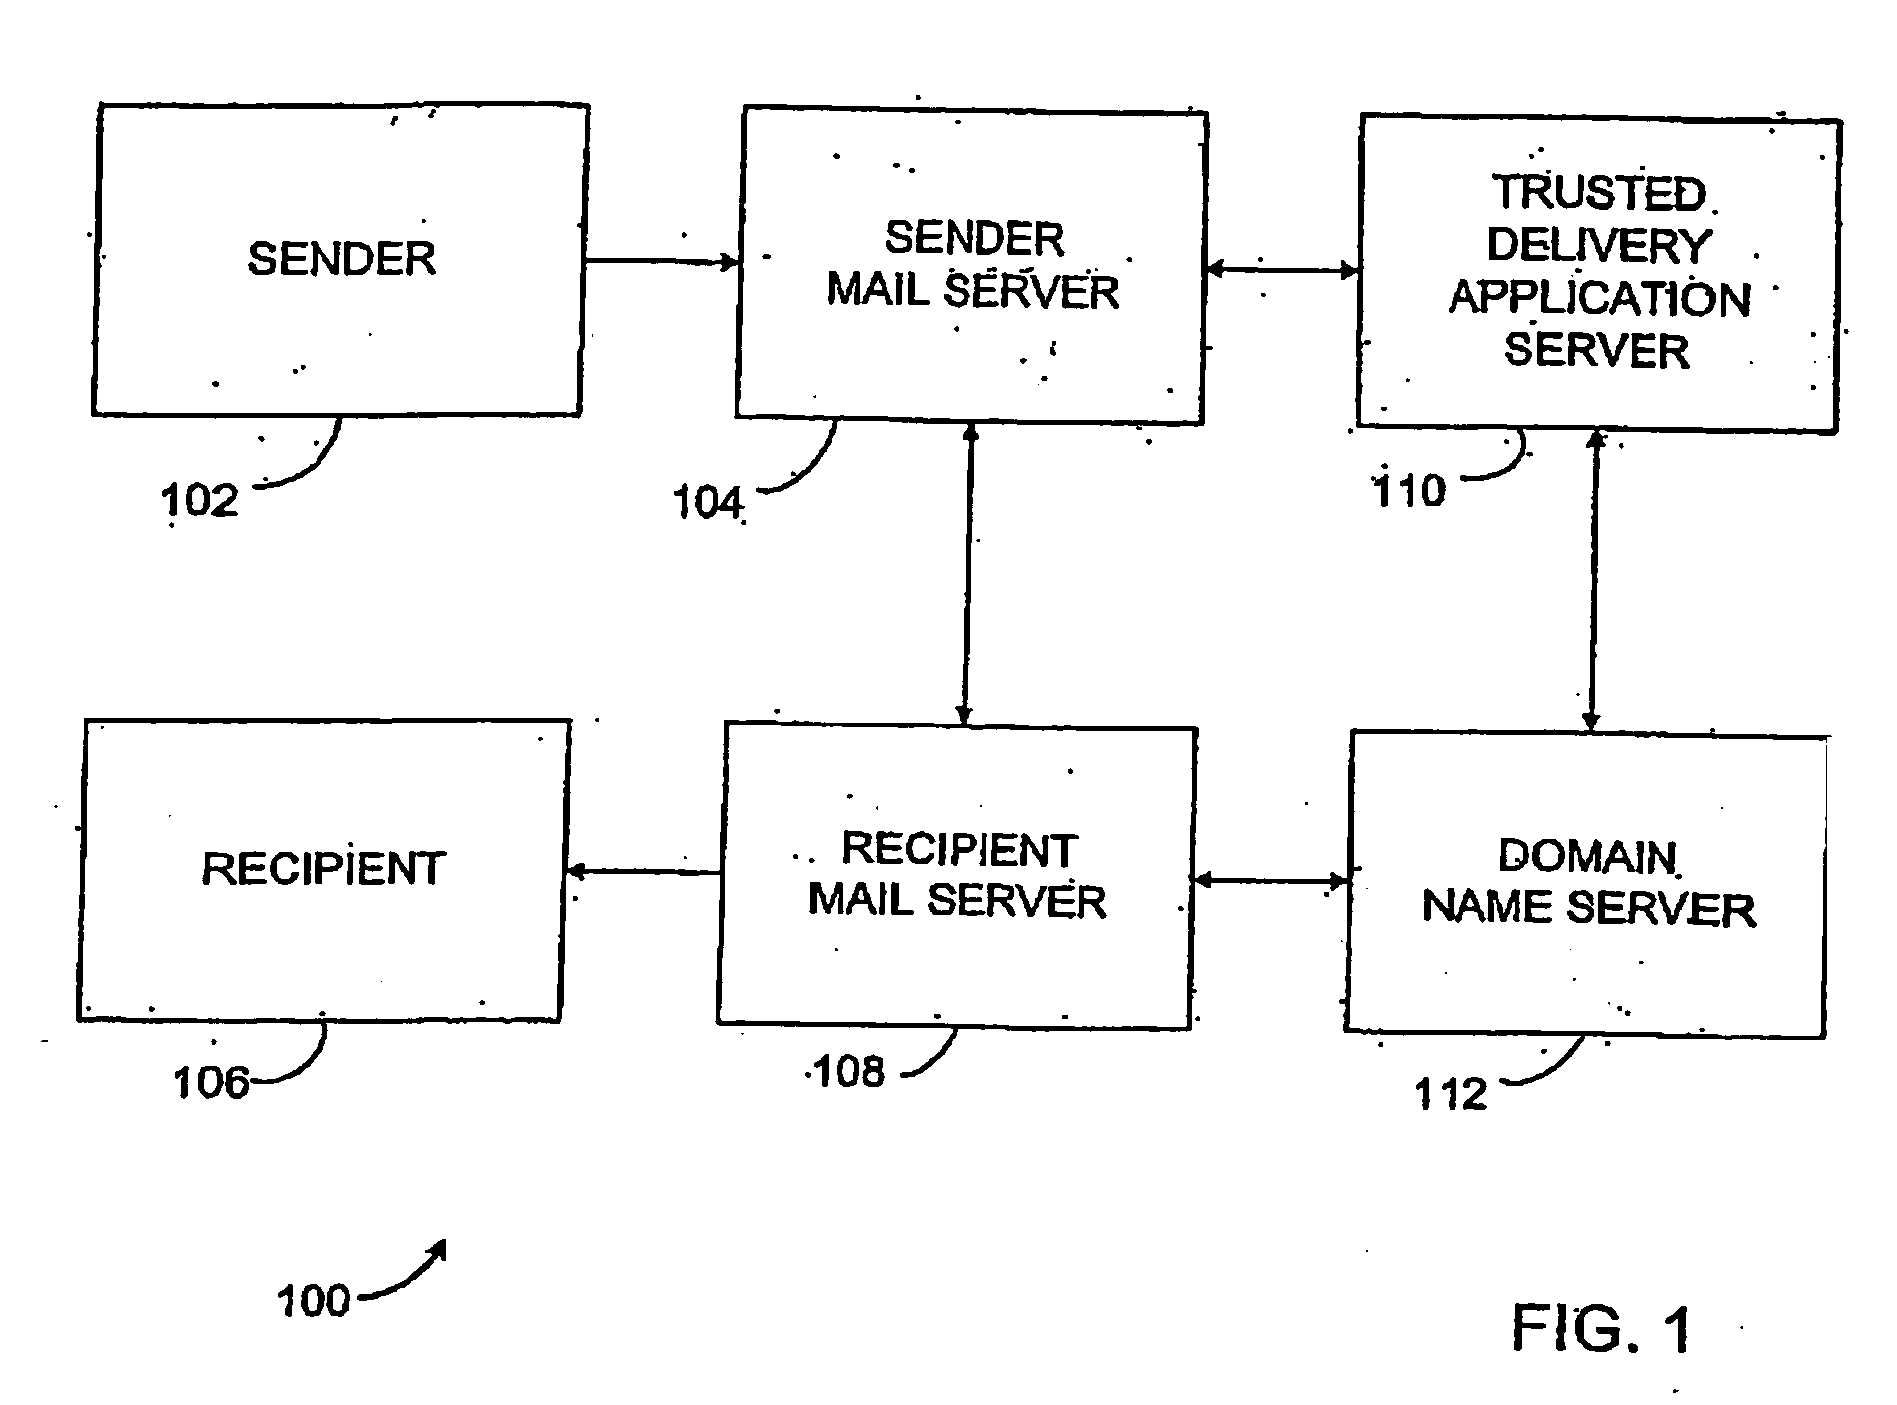 Method and system for delivering electronic messages using a trusted delivery system